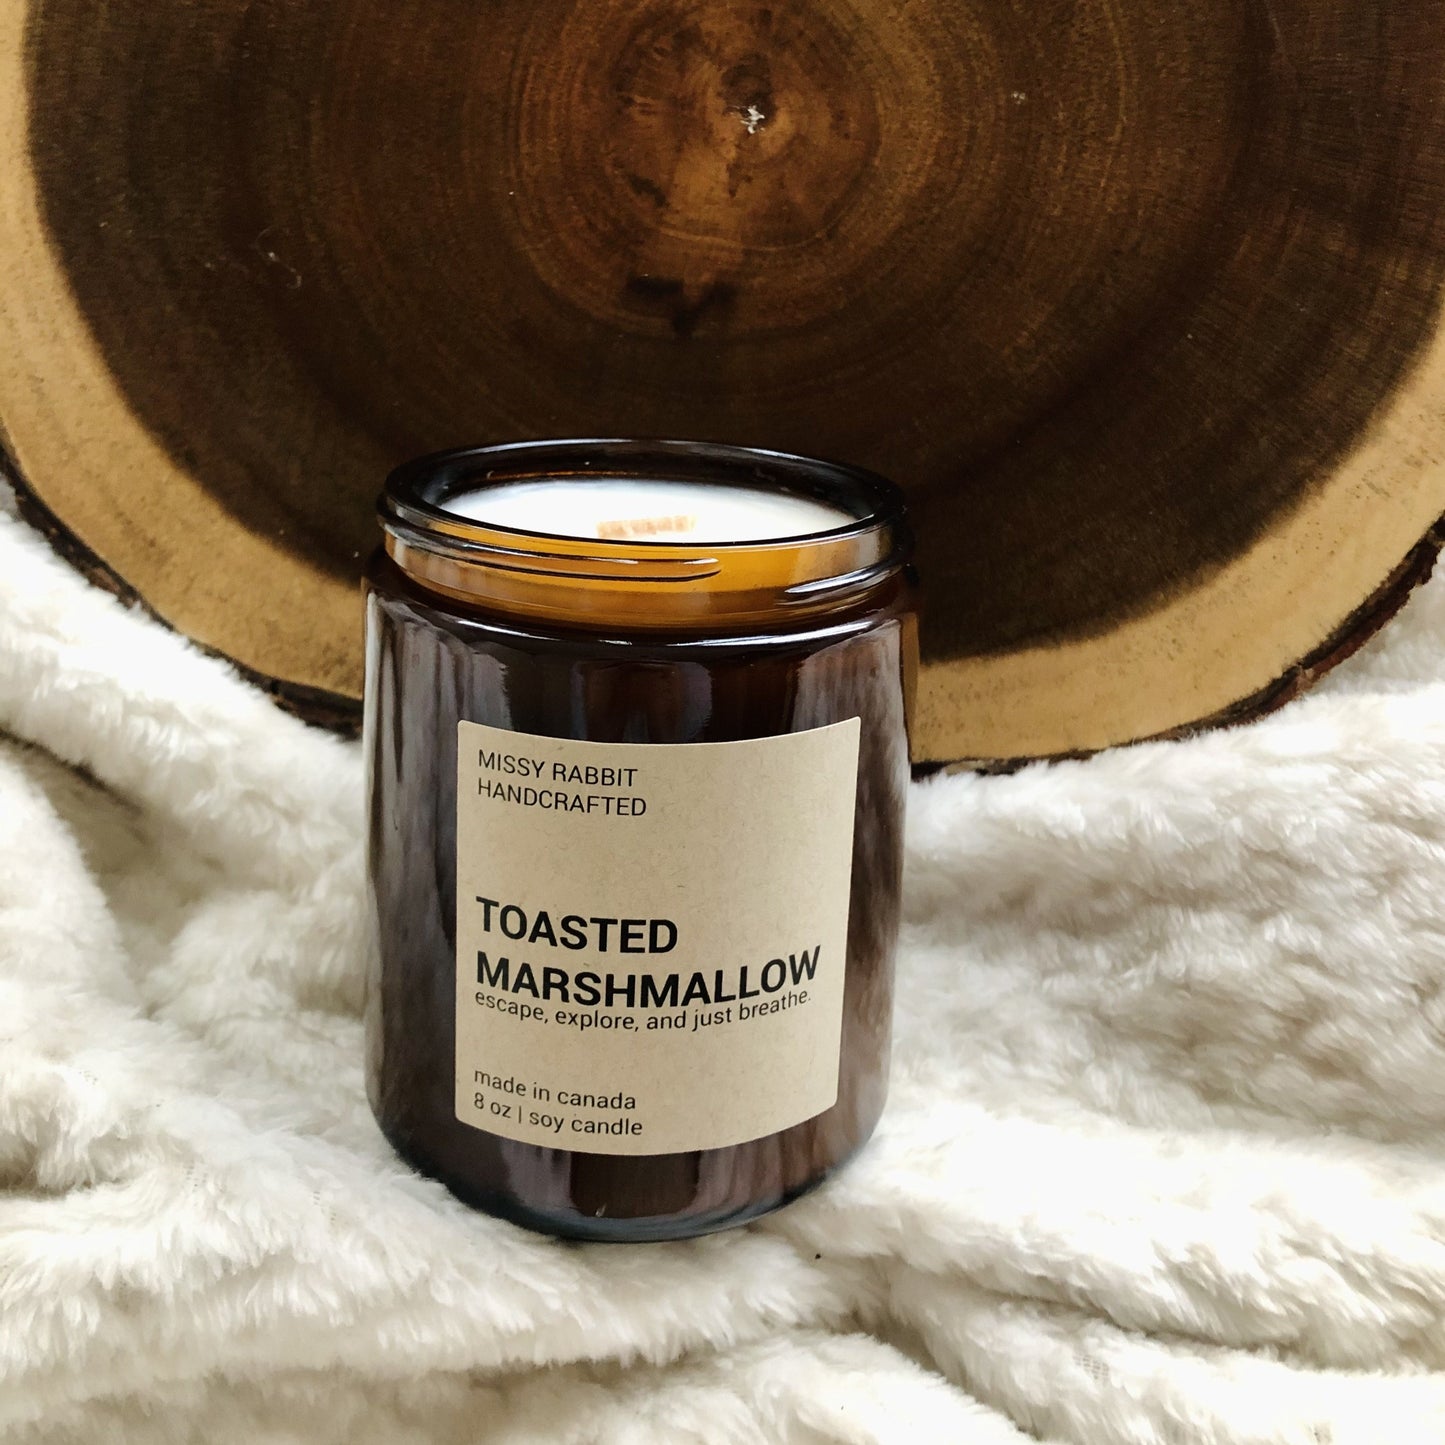 Toasted Marshmallow Soy Candle | sweet and gooey goodness